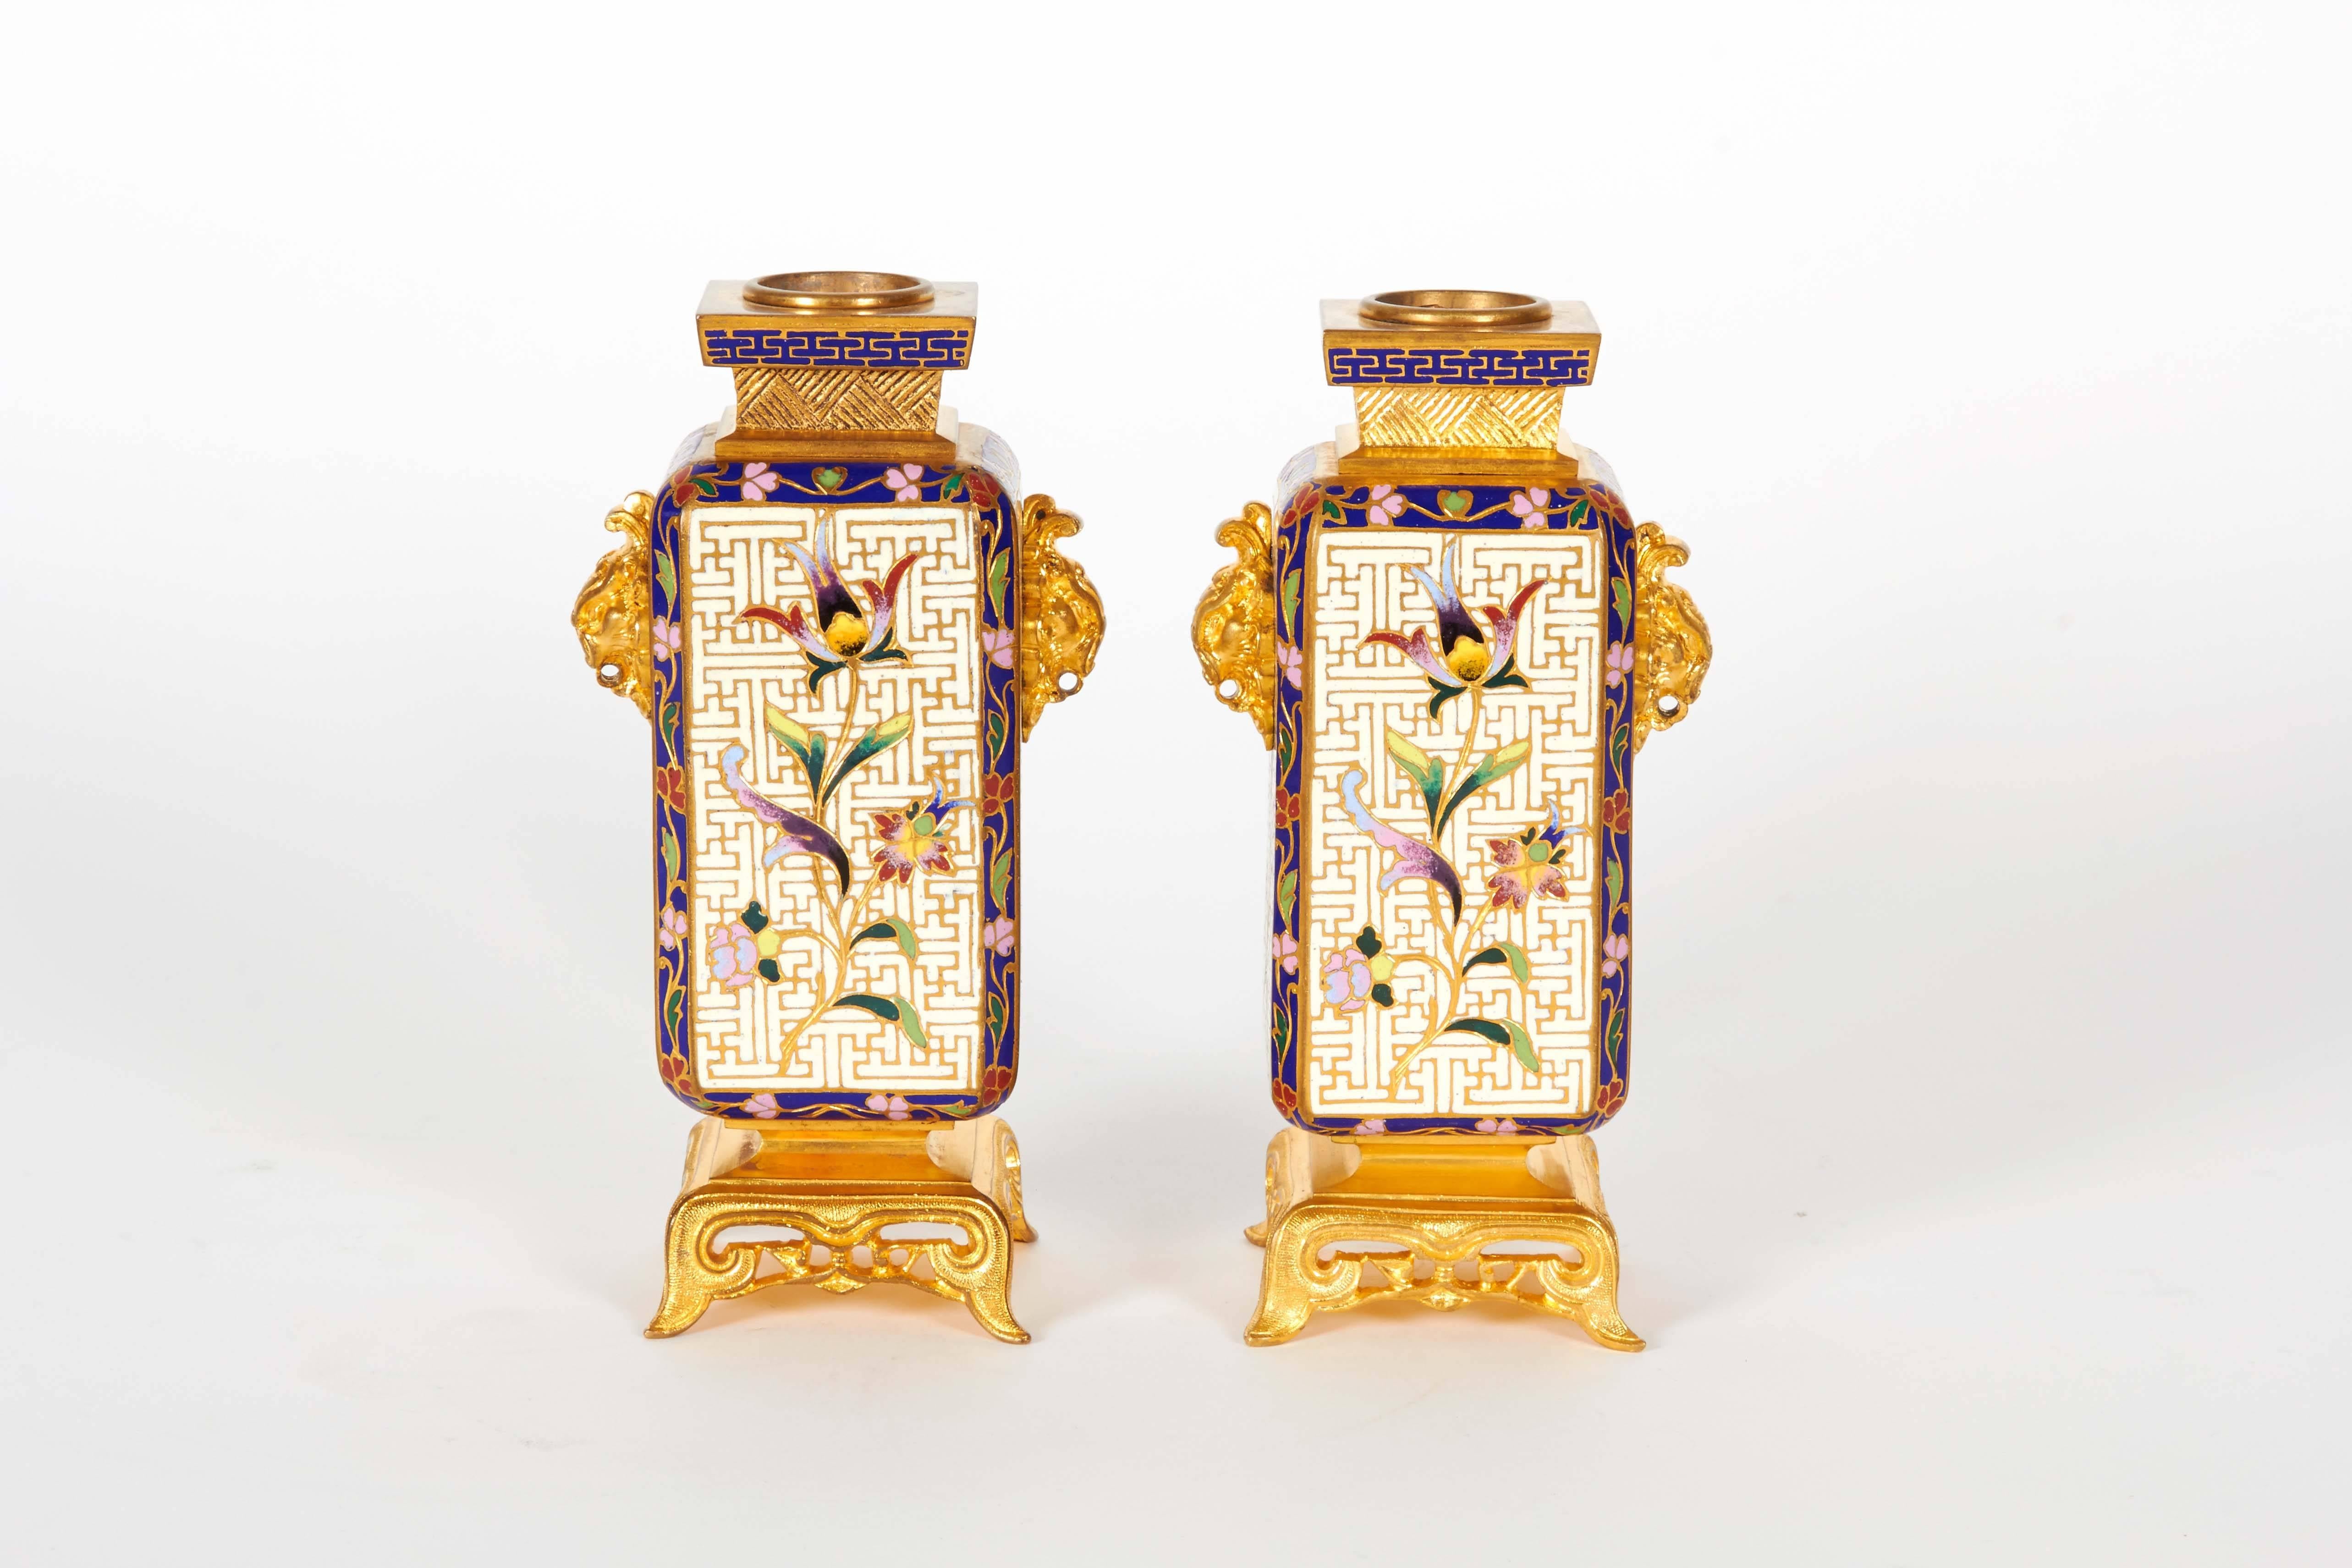 A magnificent pair of French ormolu and champlevé / cloisonné enamel vases. Superb quality. Attributed to Ferdinand Barbedienne.